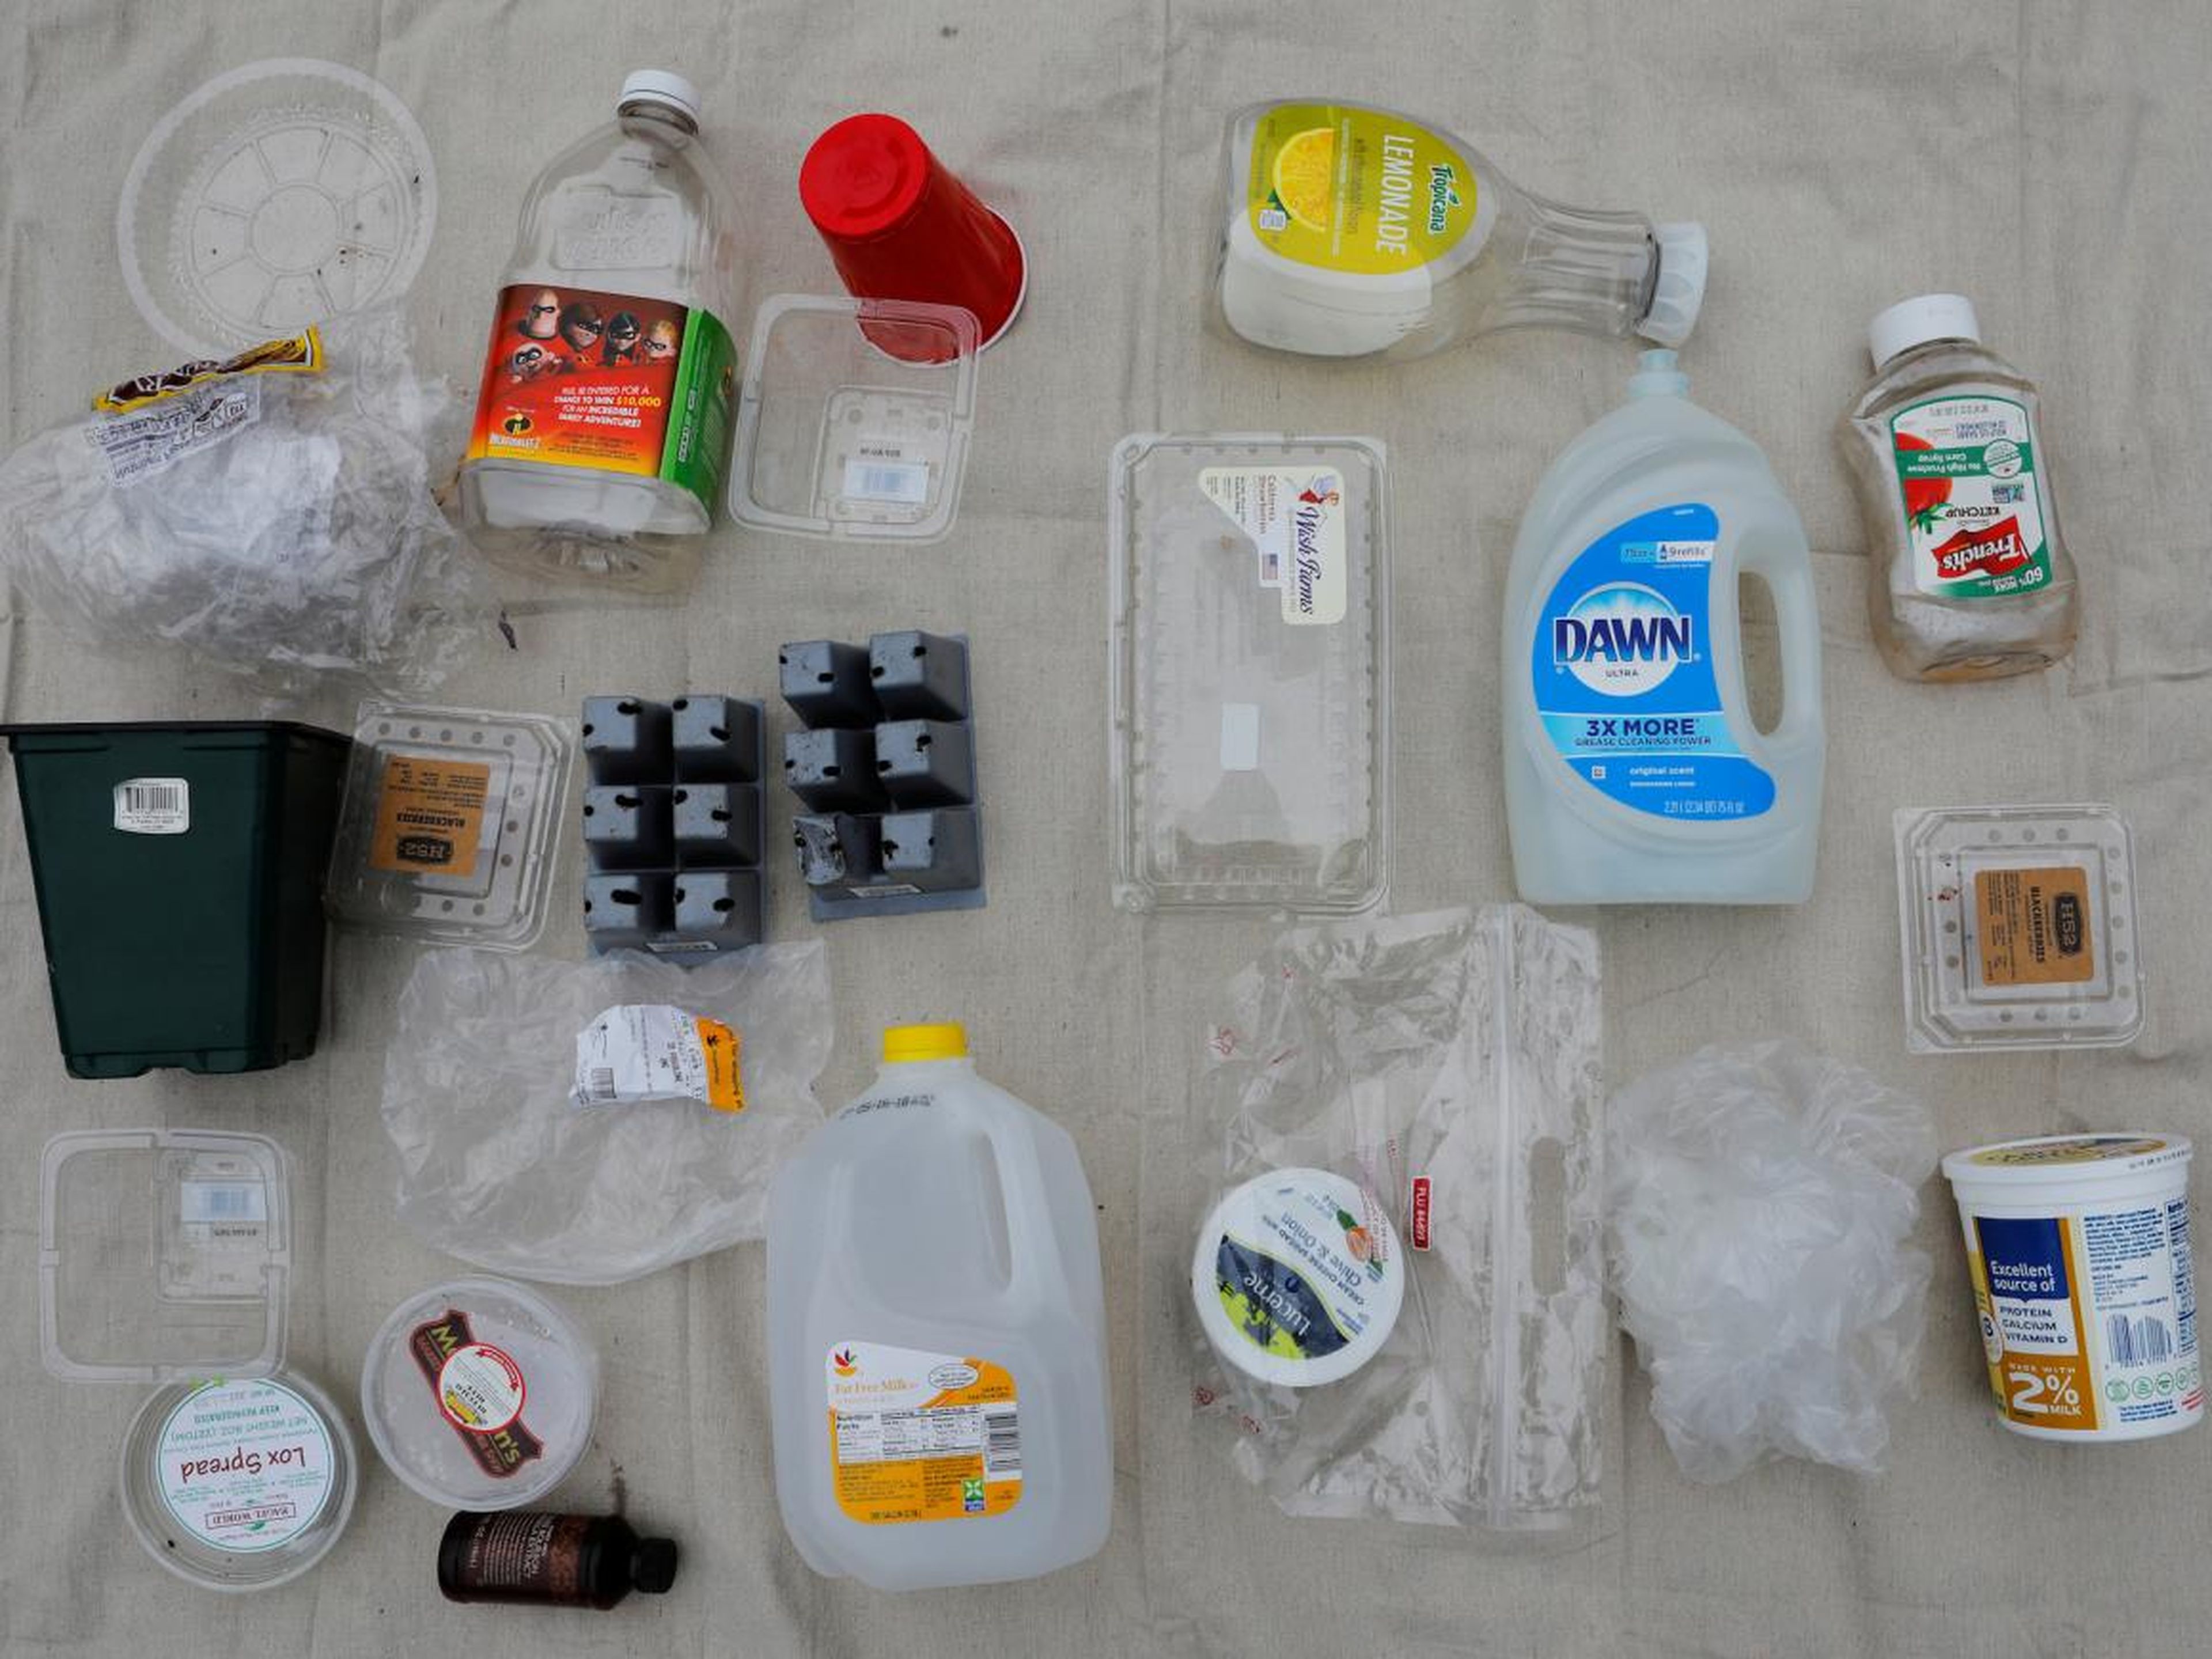 Here's all the plastic they consumed during a week in May. "When shopping, I do try to buy products with minimal packaging, but that's challenging too, everything is packaged," Brandy said.